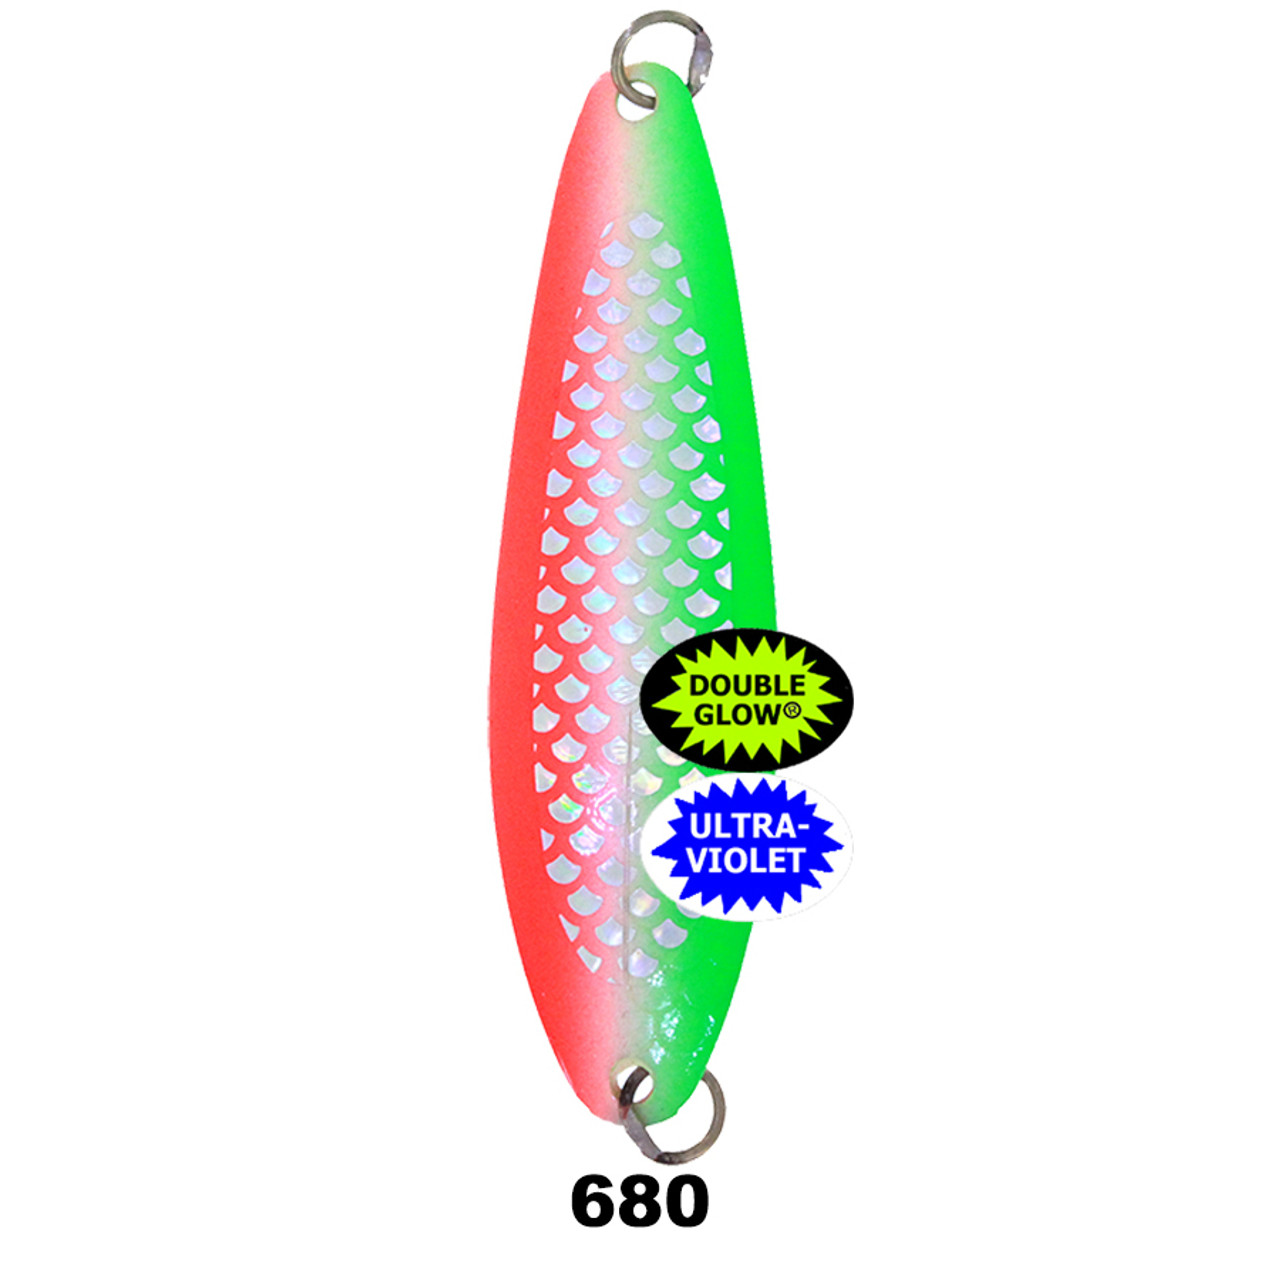 Kingfisher Trolling Spoon -Neon Chartreuse/Red Dot by Gold Star at